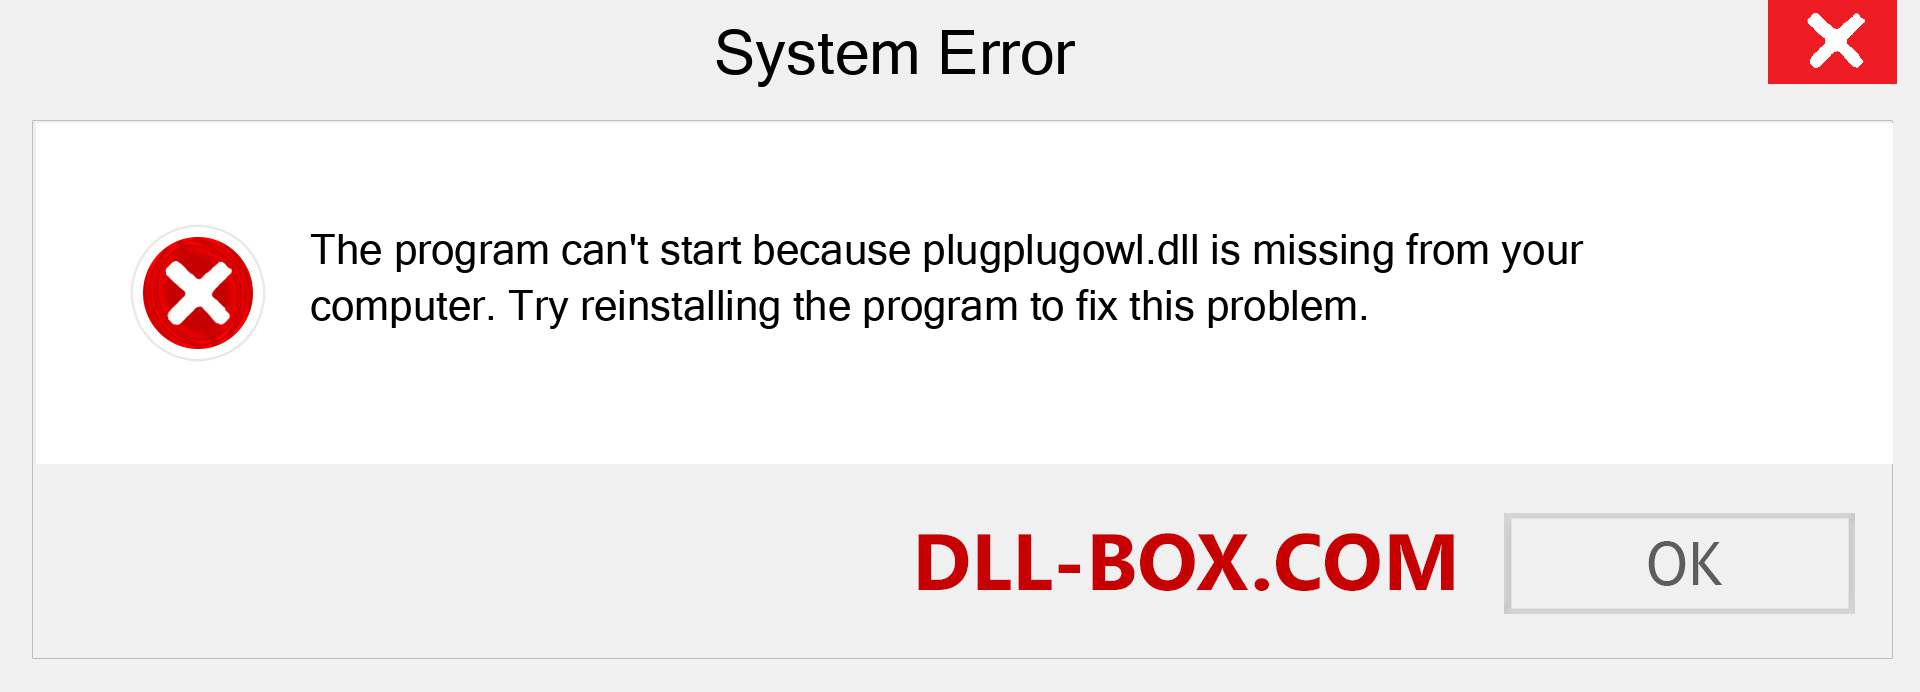  plugplugowl.dll file is missing?. Download for Windows 7, 8, 10 - Fix  plugplugowl dll Missing Error on Windows, photos, images